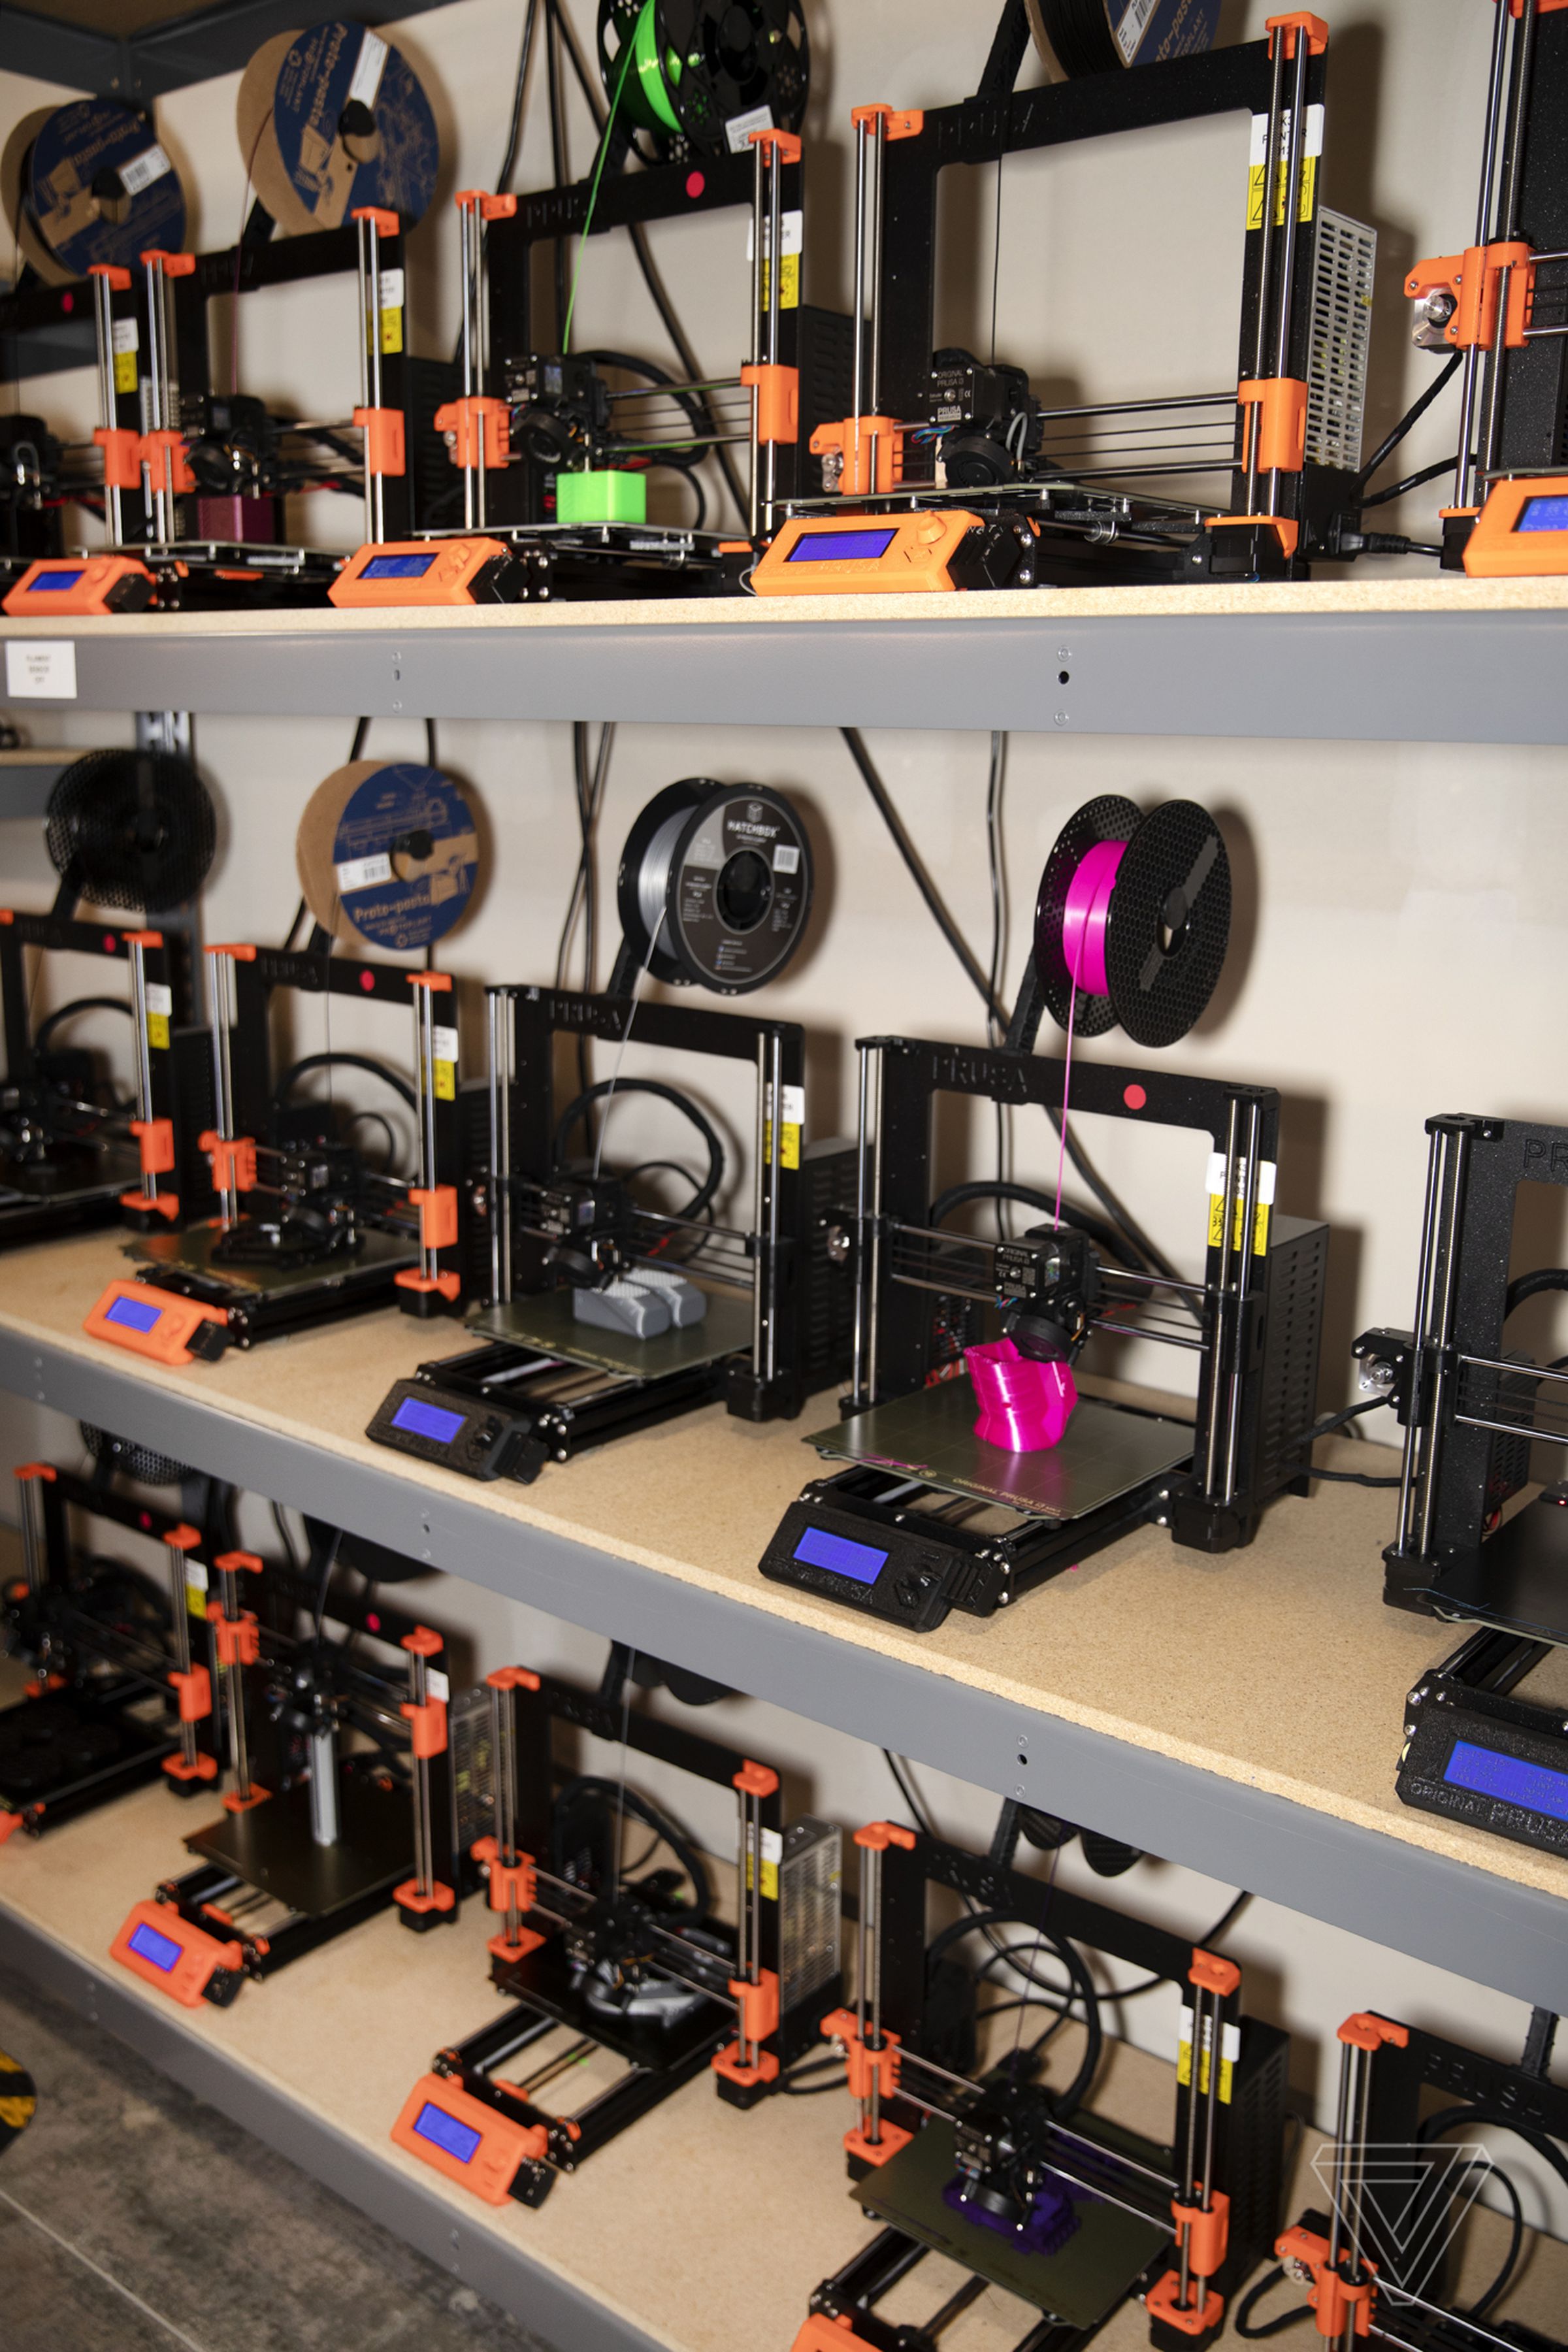 Ninety-seven 3D printers produce modification parts and complete blasters at Out of Darts.